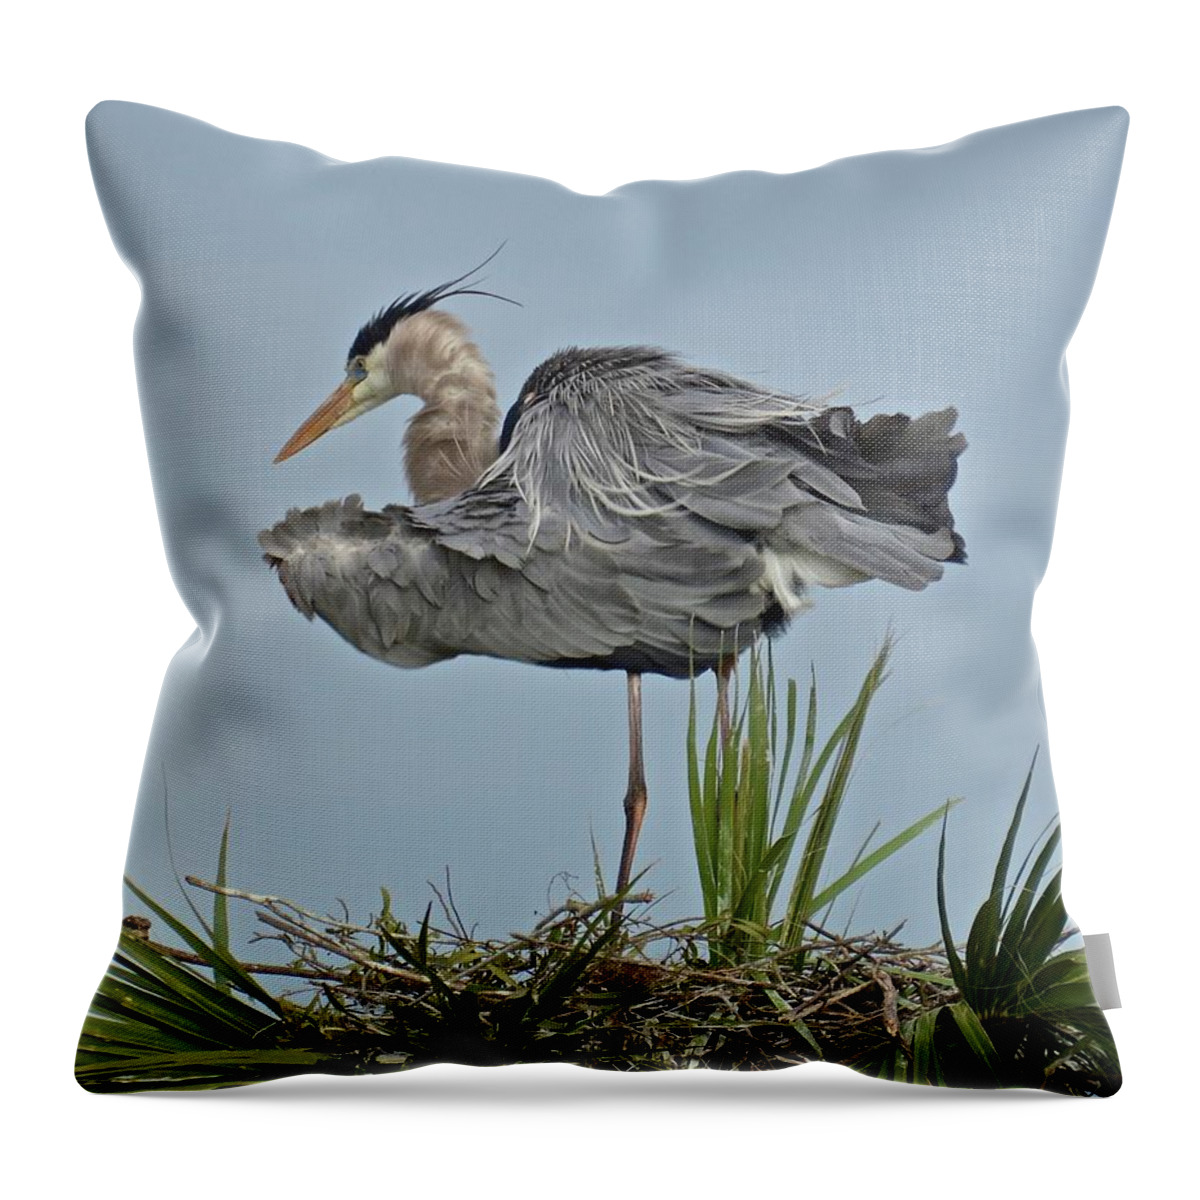 Nest Throw Pillow featuring the photograph All Shook Up by Carol Bradley